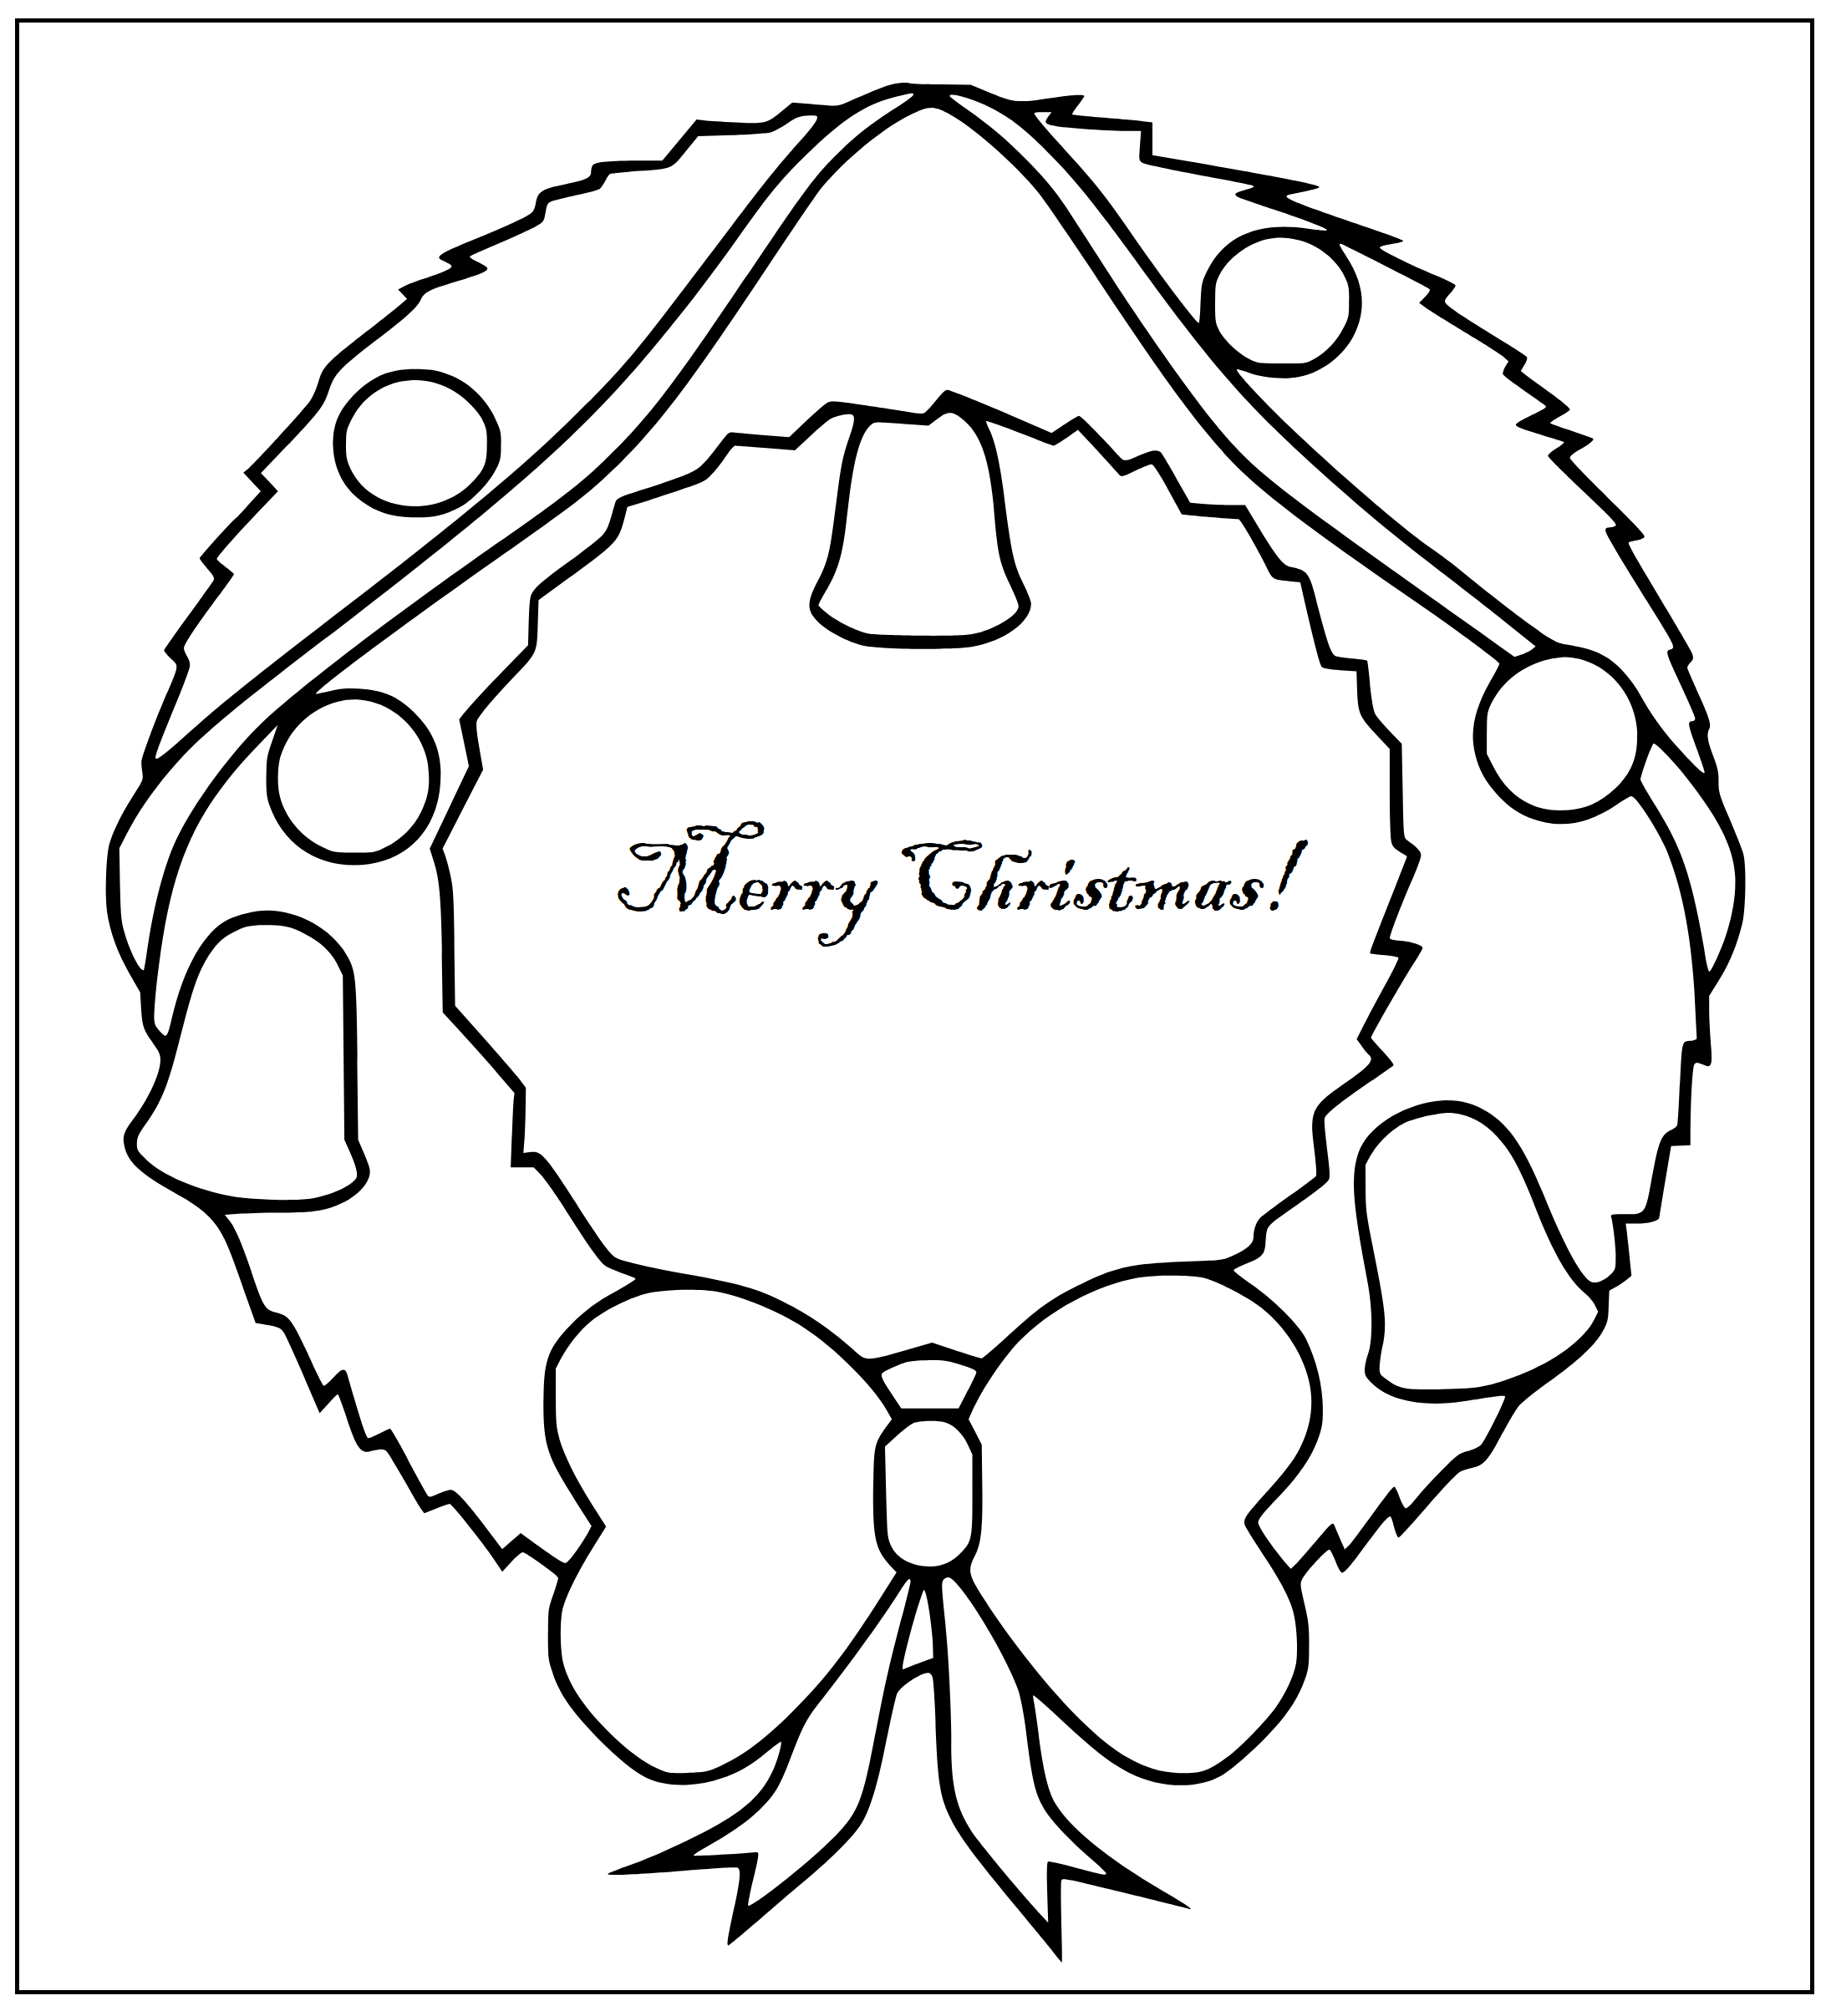 Printable Merry Christmas Wreath Coloring Page for kids.